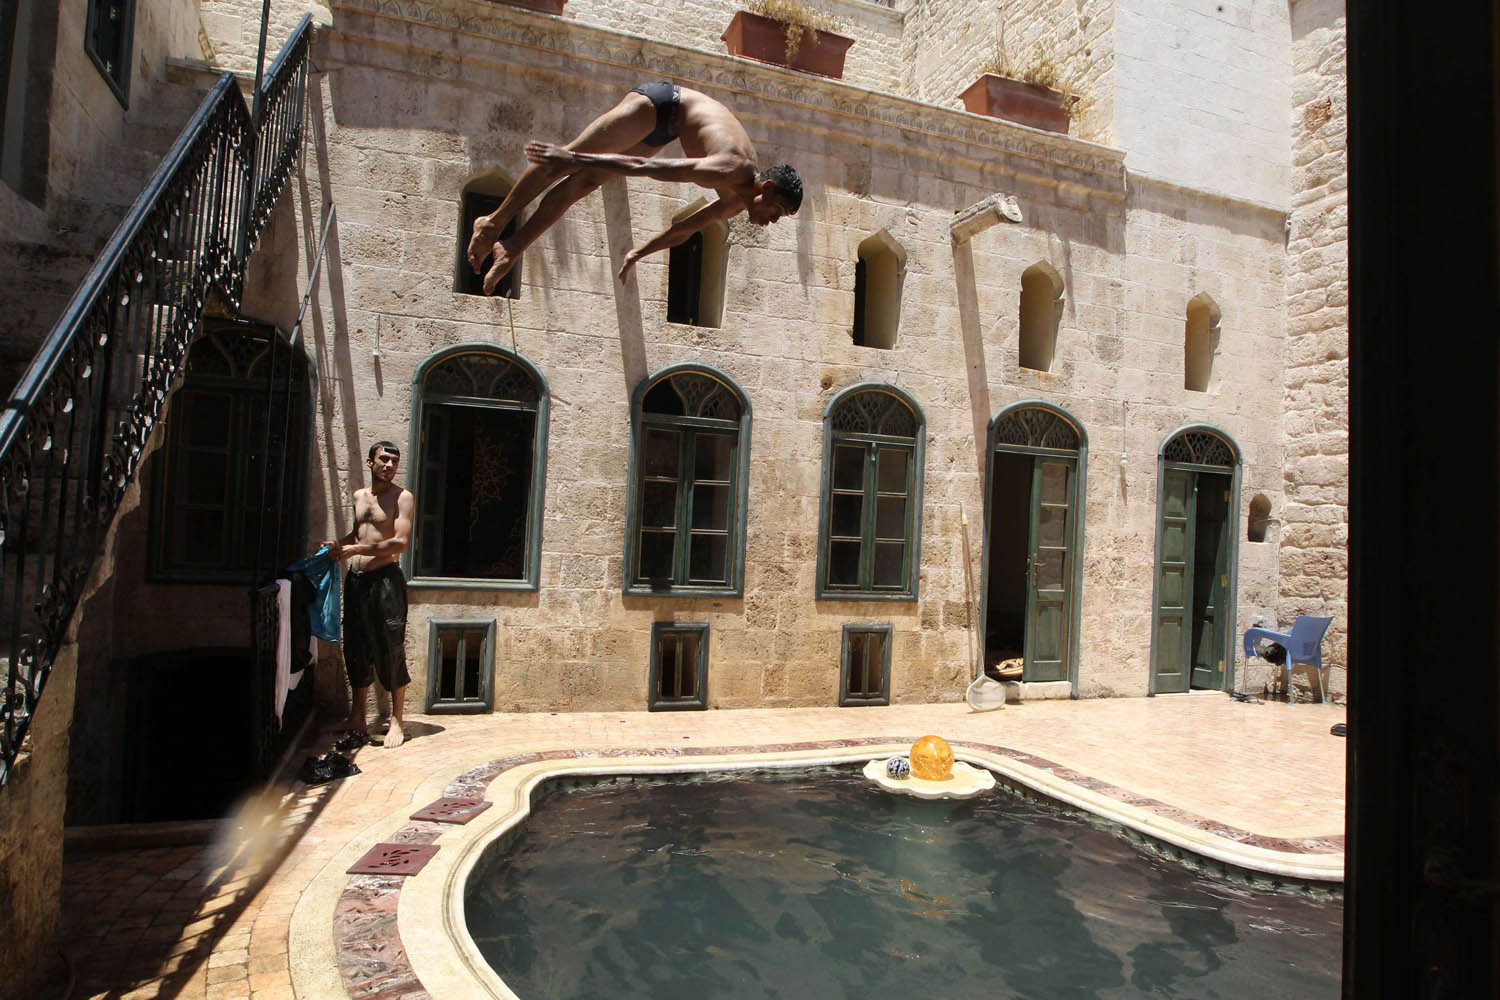 A Free Syrian Army fighter dives into a swimming pool inside a house in the old city of Aleppo